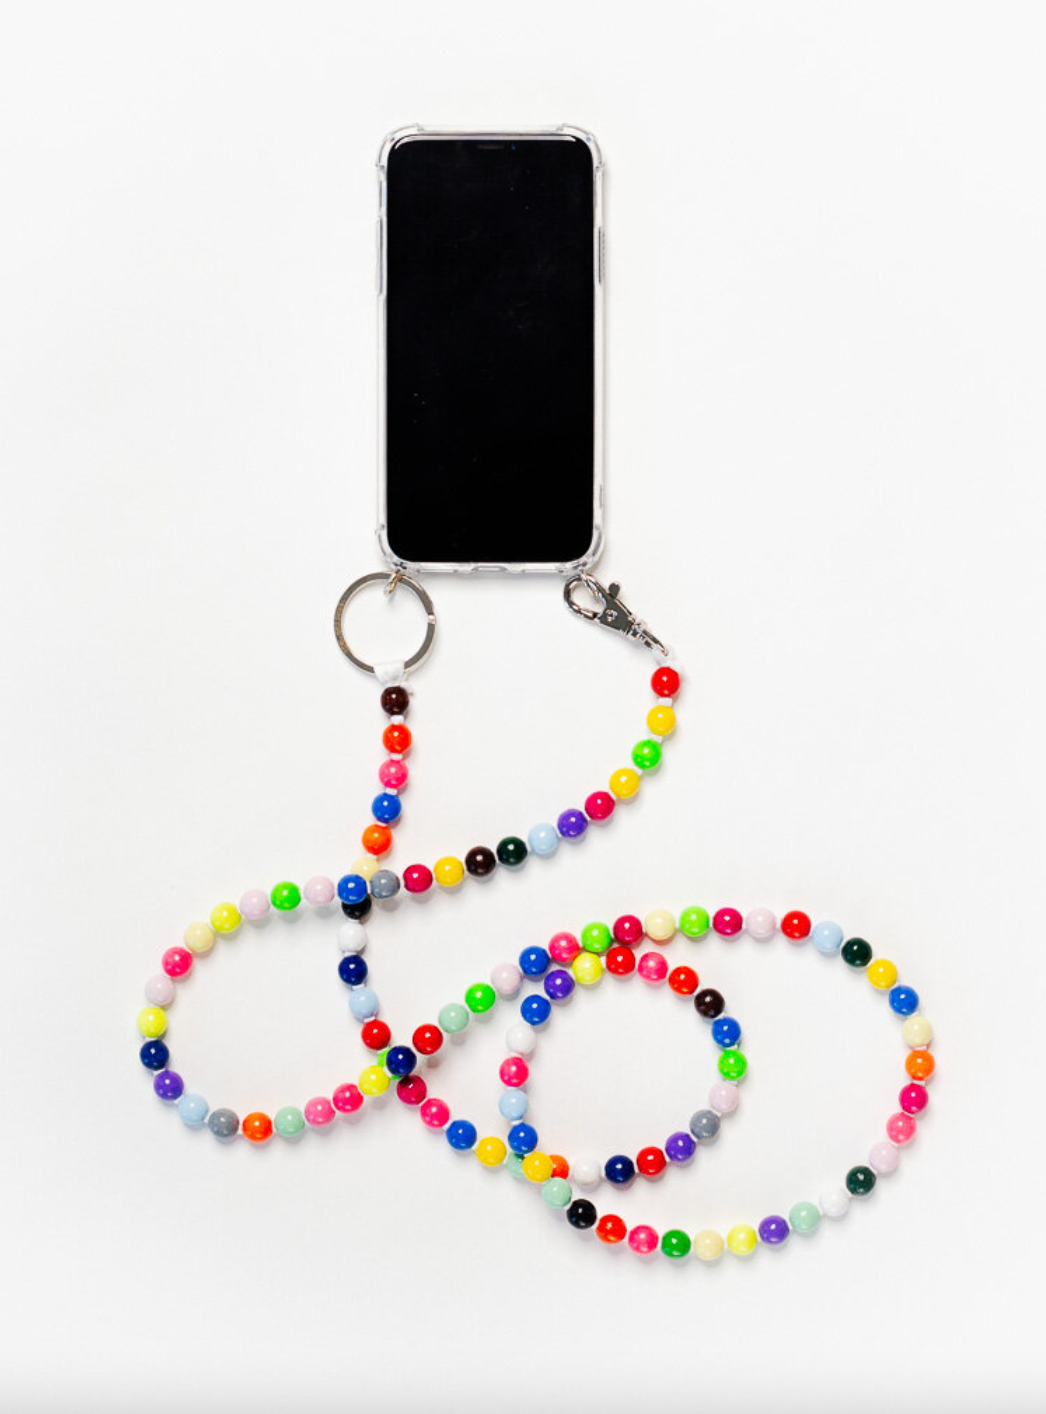 Product Image for Phone Necklace, Multi Mix